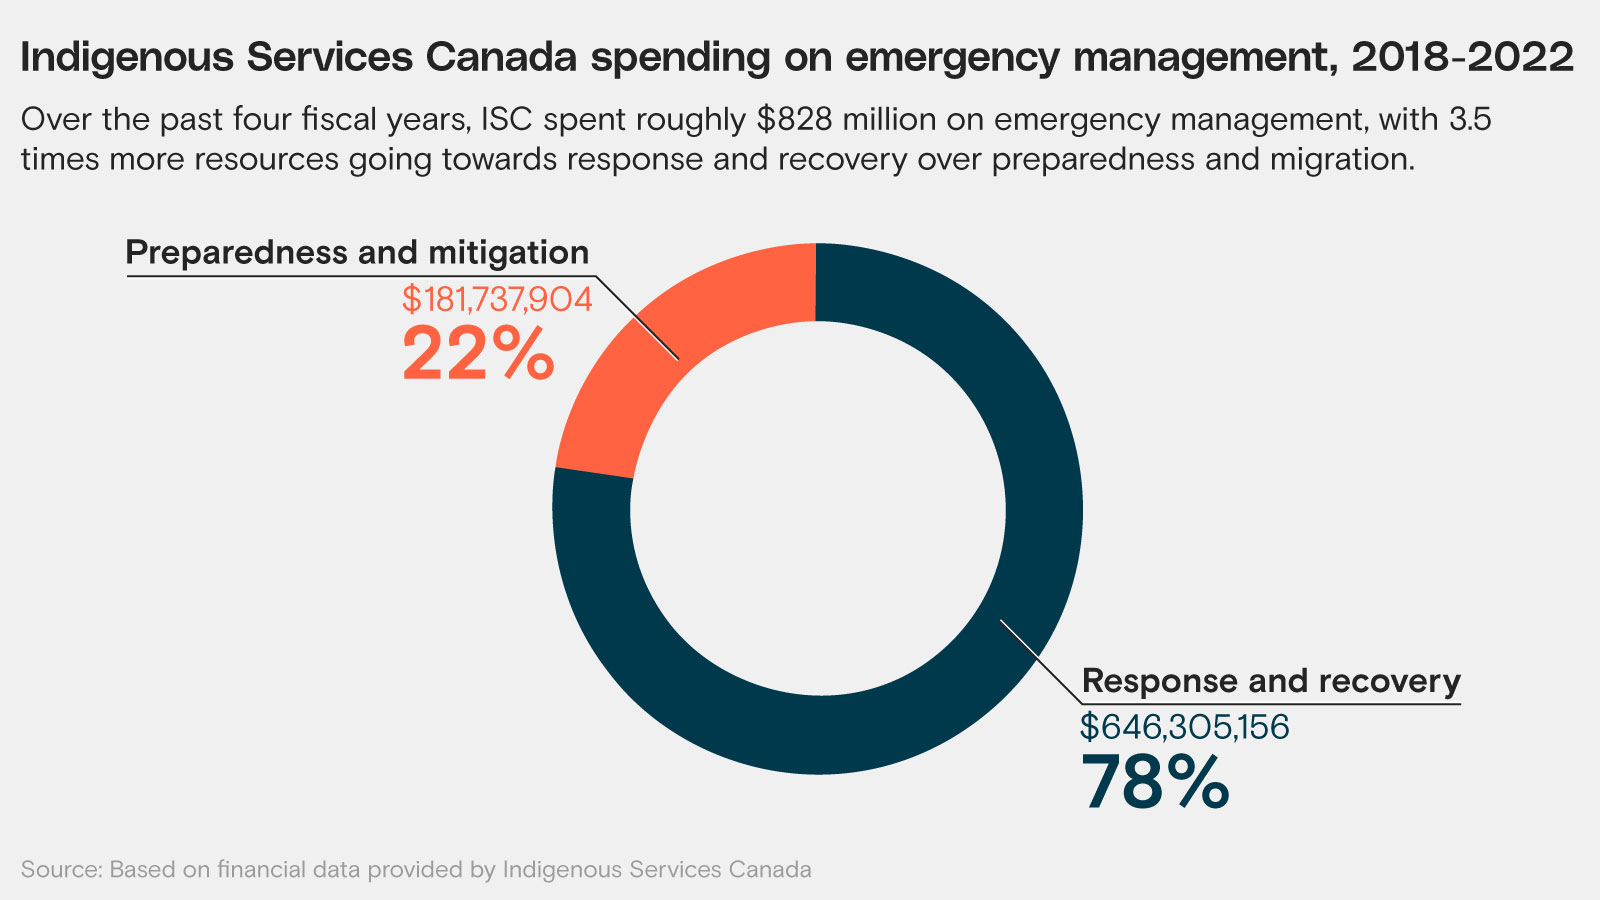 Graph showing spending amounts by Indigenous Services Canada on emergency management from 2018-2022 in the areas of preparedness and mitigation, and response and recovery